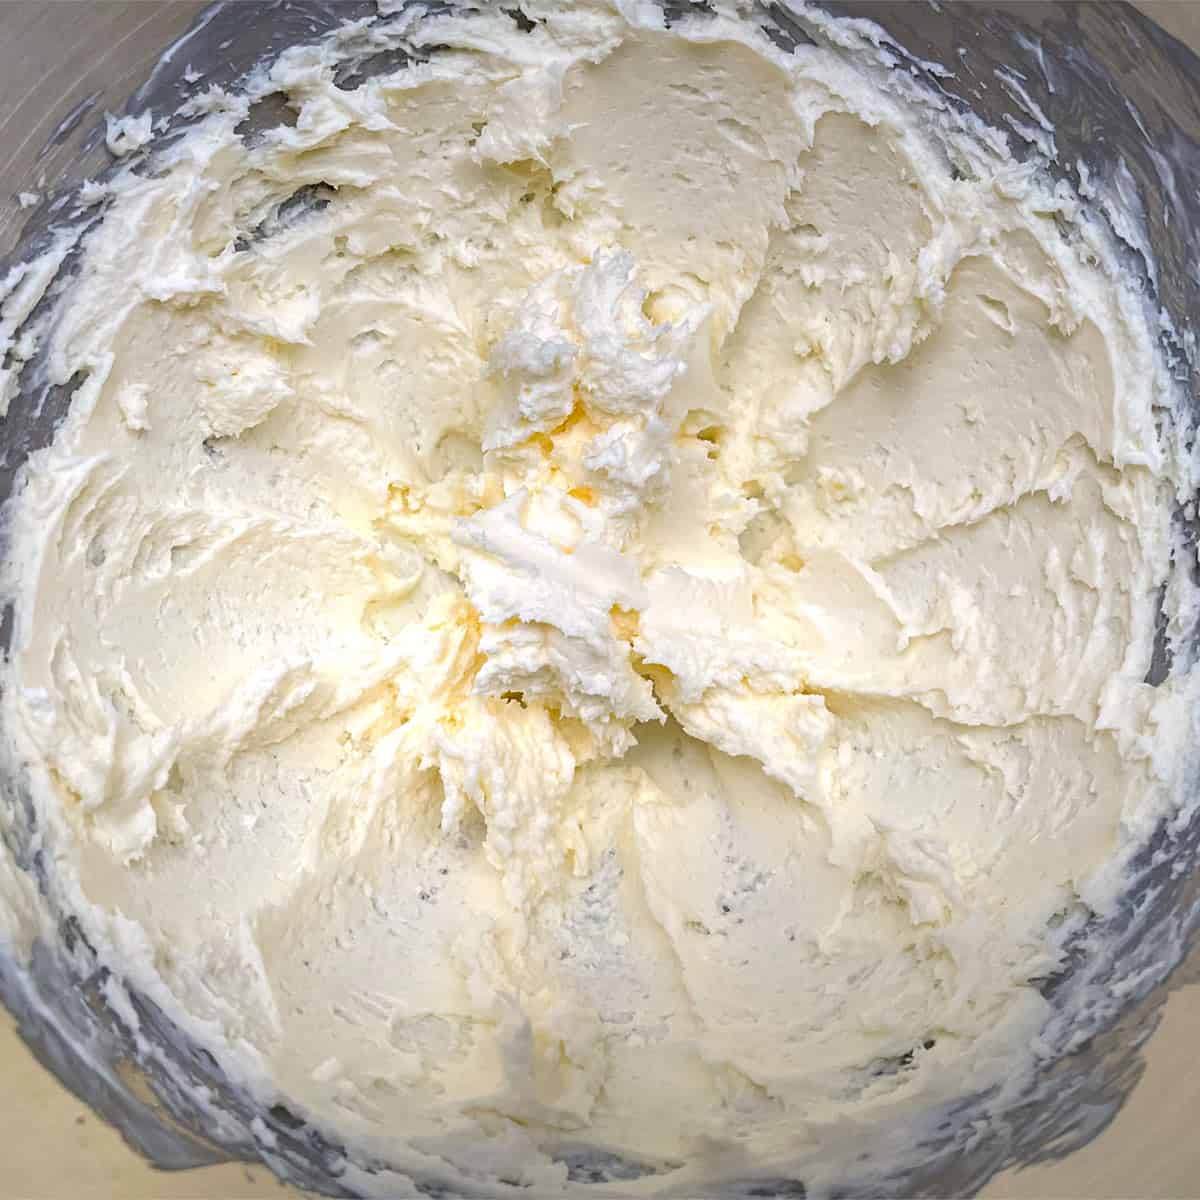 Creamed butter and cream cheese in a mixer bowl.